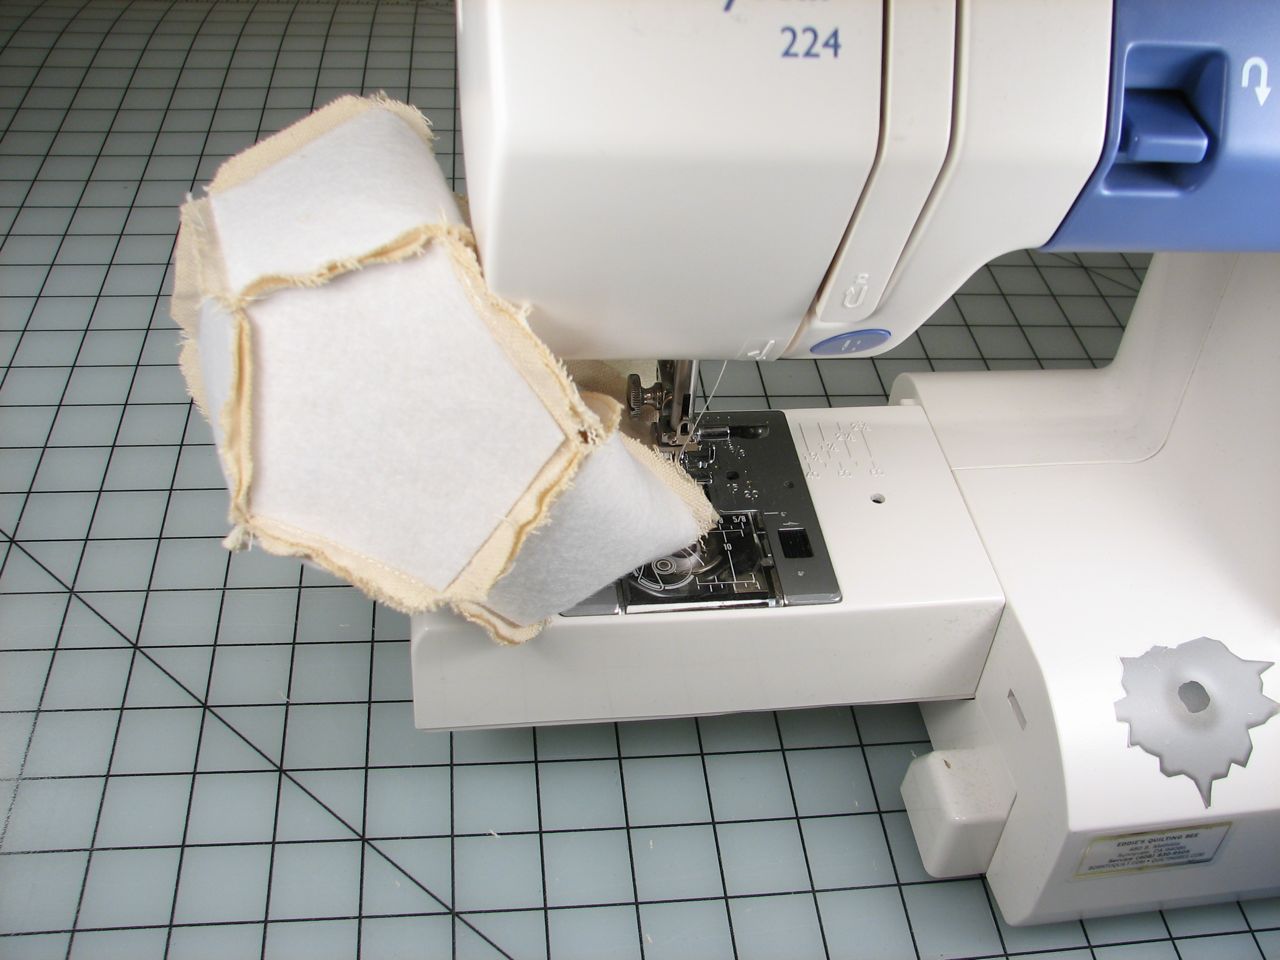 the fabric is being inserted under the sewing machine